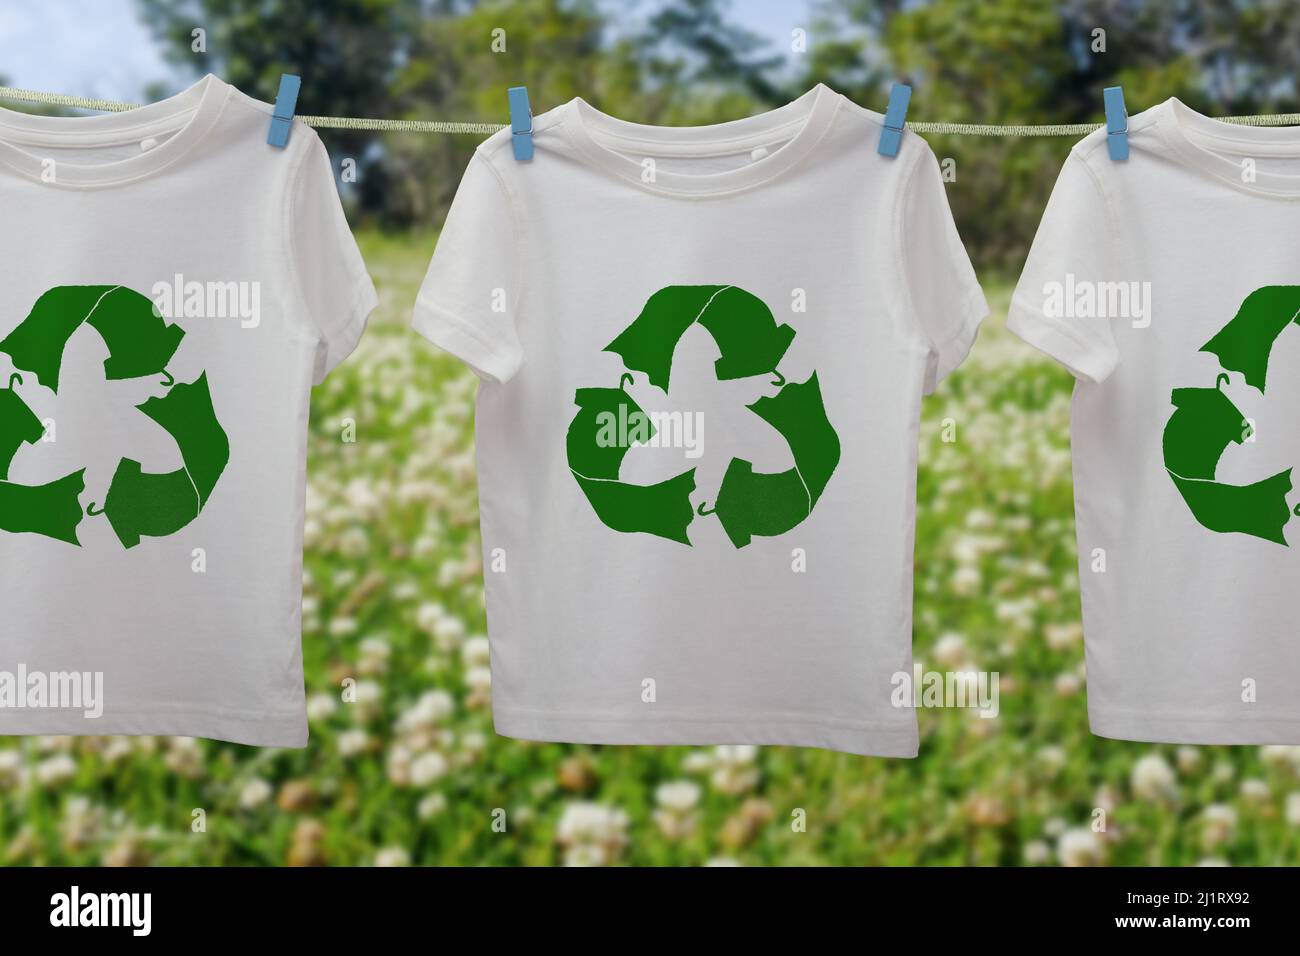 Recycle clothes icon on t shirts on line, sustainable fashion concept reuse, recycle clothes and textiles to reduce waste Stock Photo